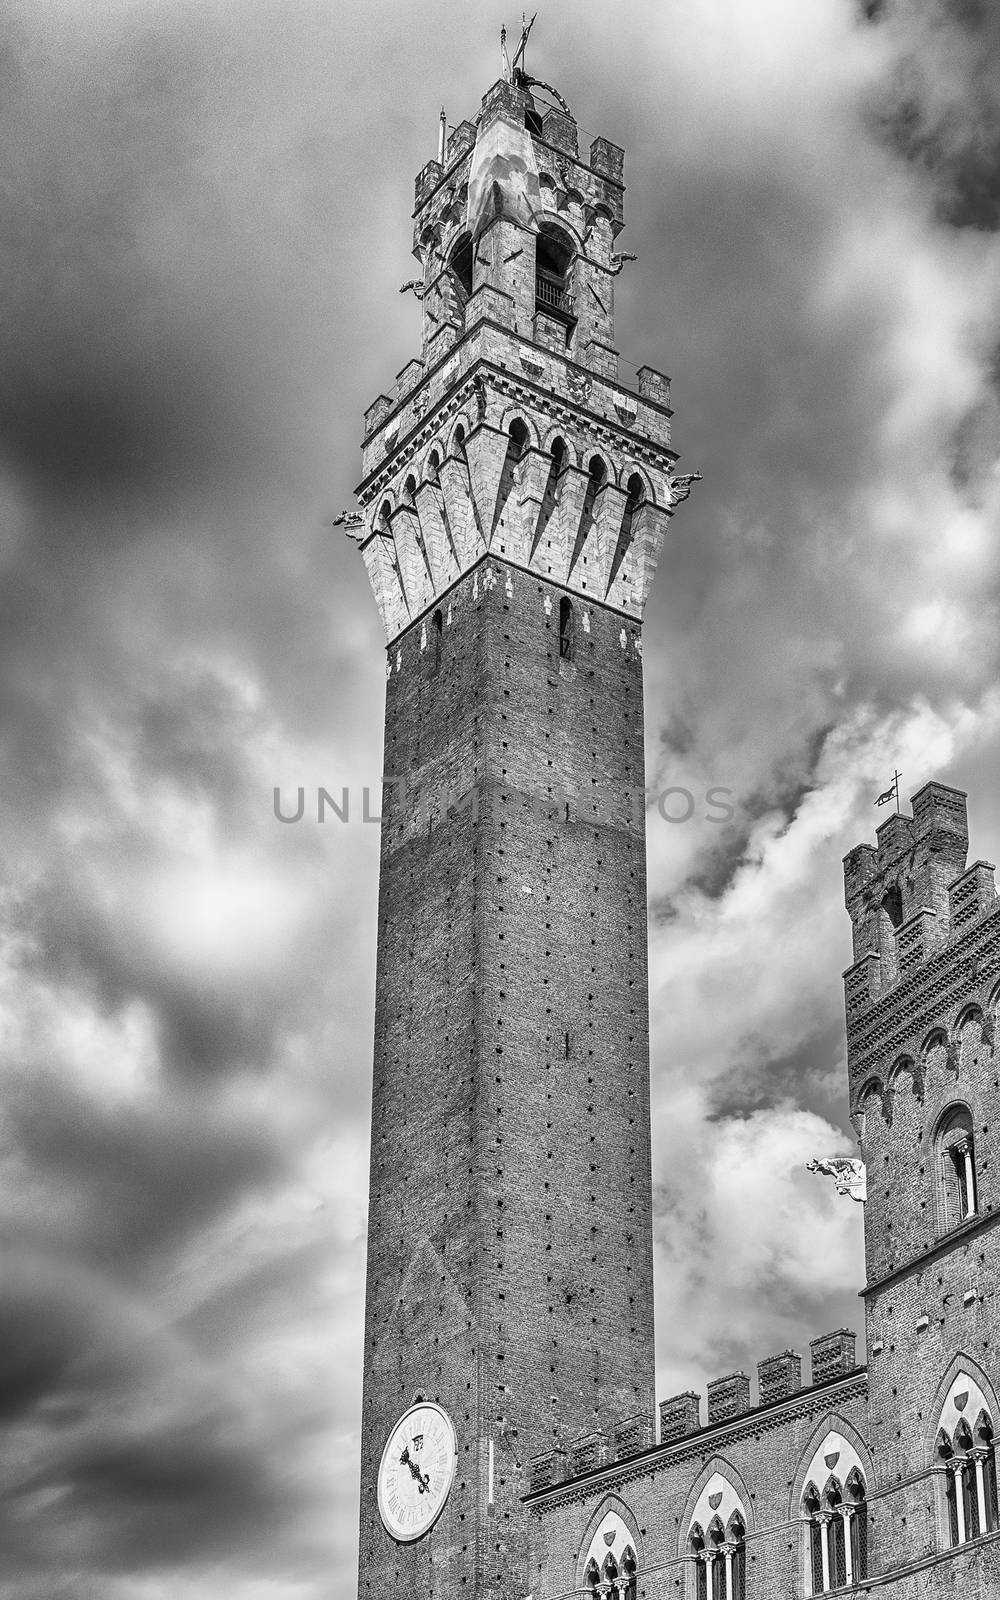 View of Torre del Mangia medieval tower, located in Piazza del Campo, it is one of the most iconic landmark of Siena, Italy